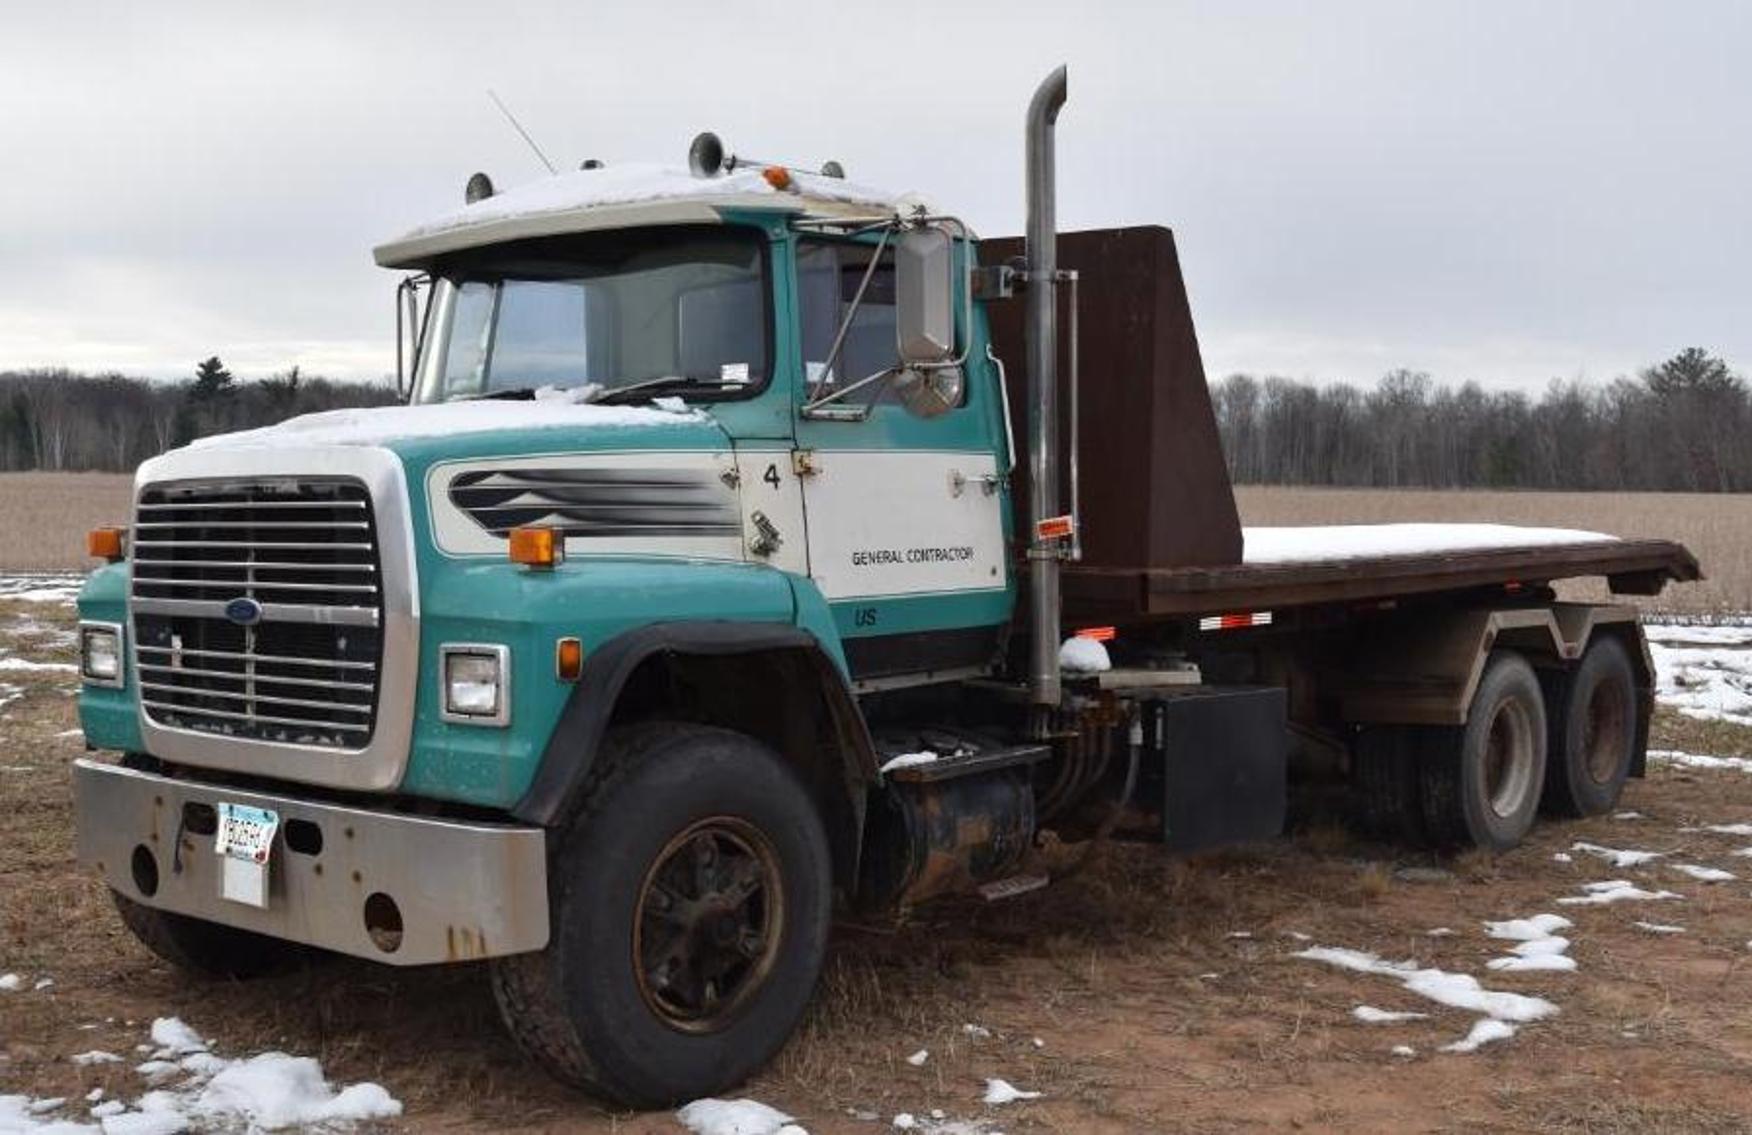 1984 Ford 8000 Roll Off, 2001 Ford E-350, Waste Oil Burner, Wood Burning Stove, Equipment